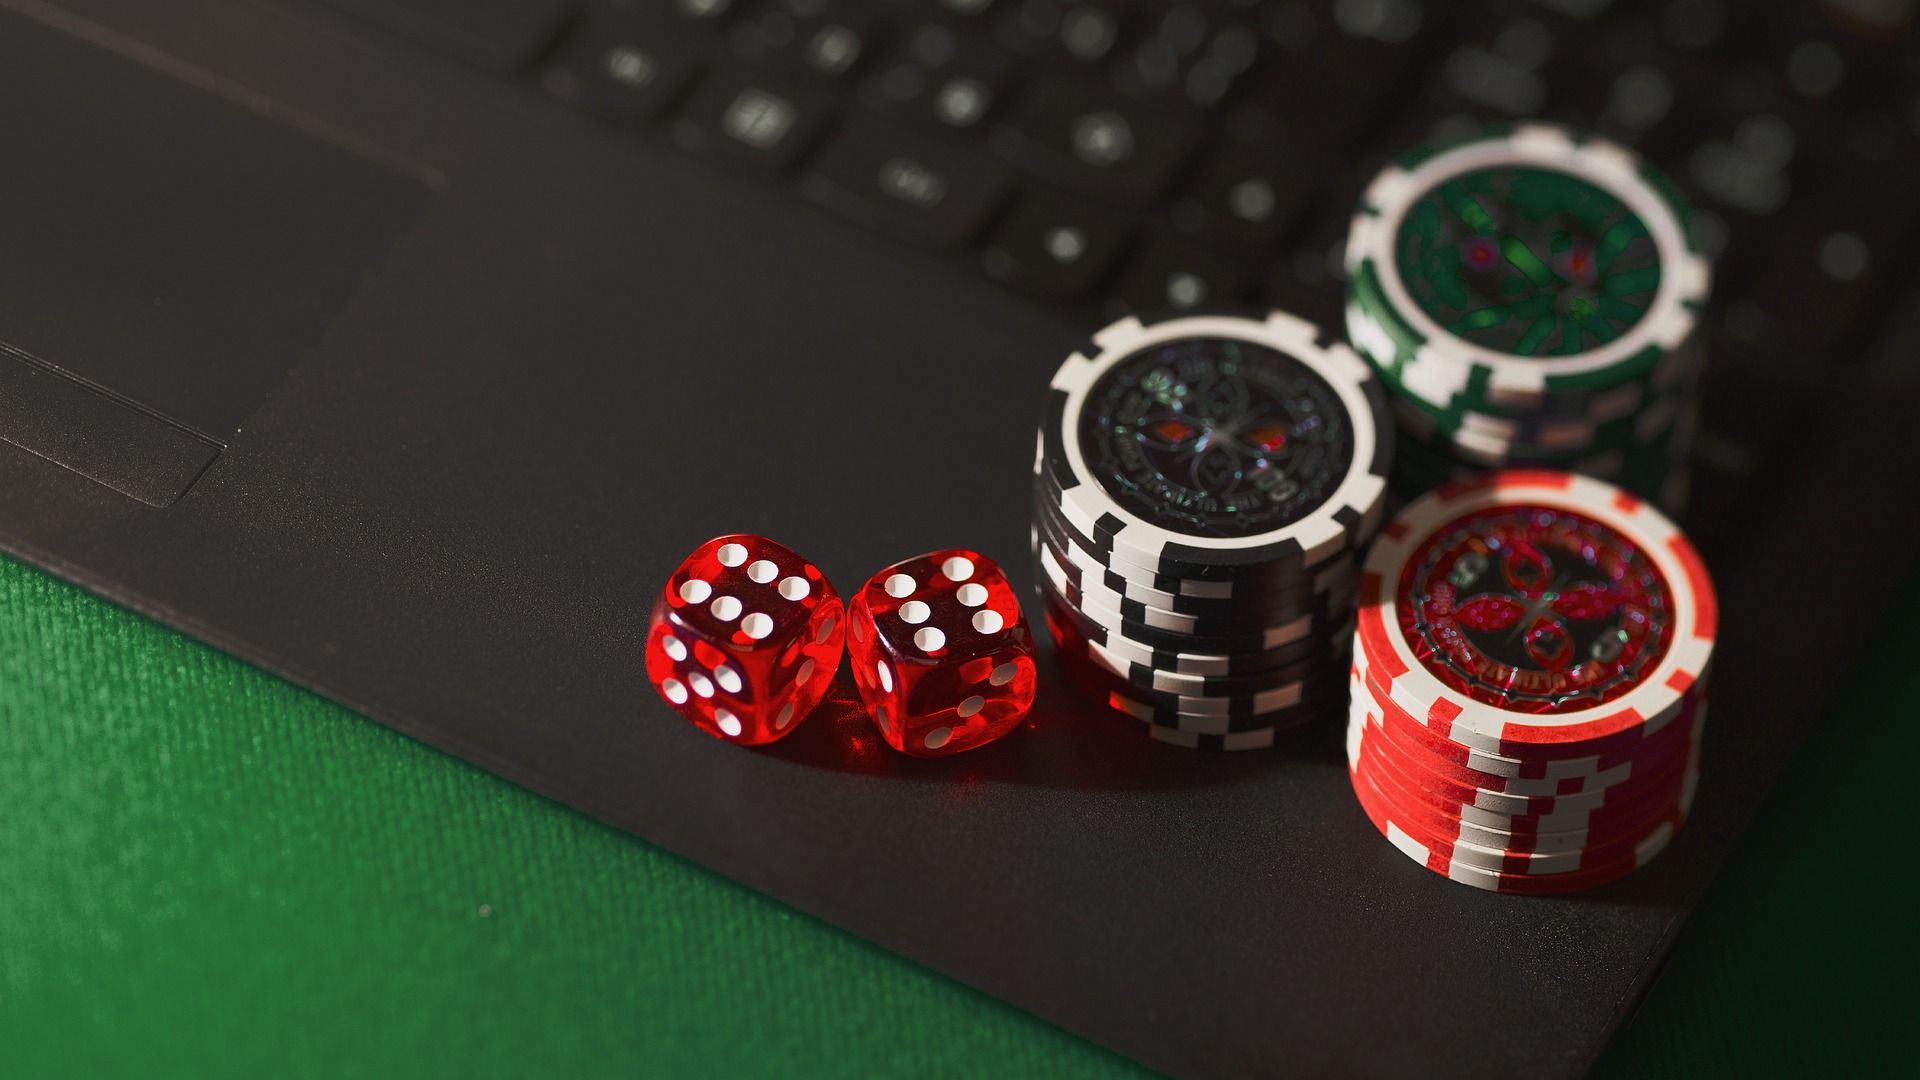 What Are Legit Casino Games That Pay Real Money?